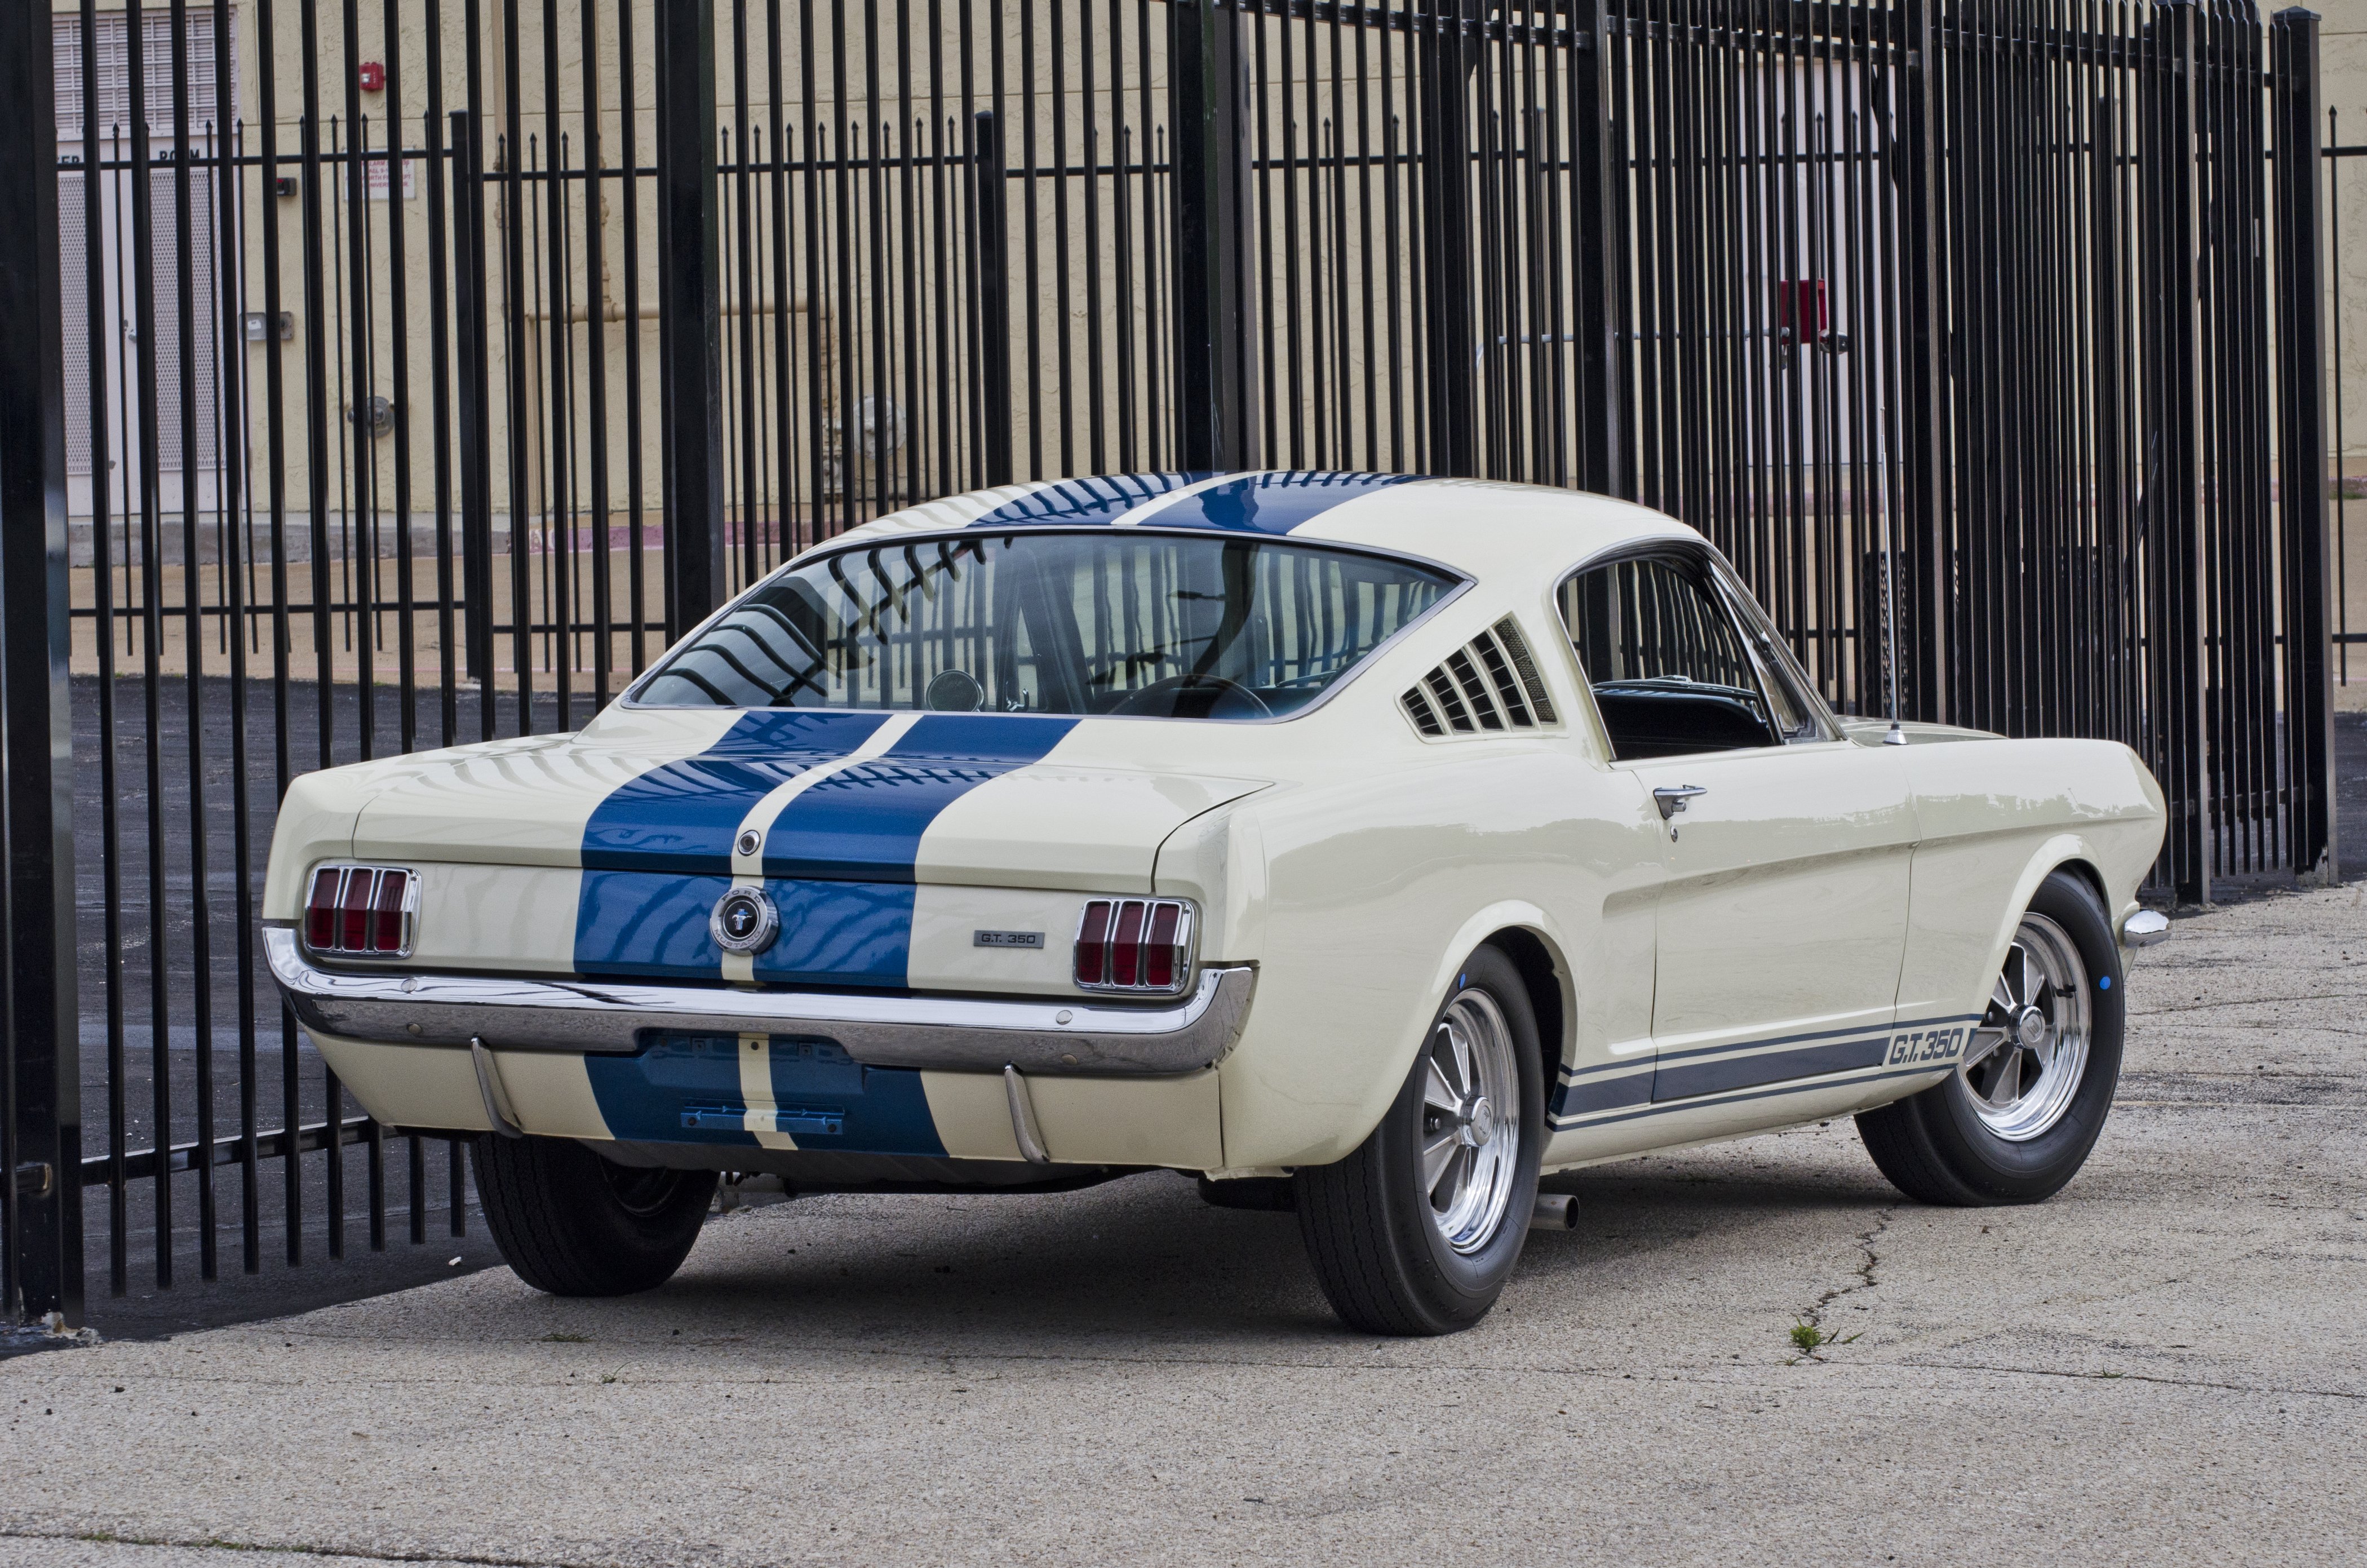 Shelby Mustang Gt350 Fastback Muscle Car White Car Car 4200x2782